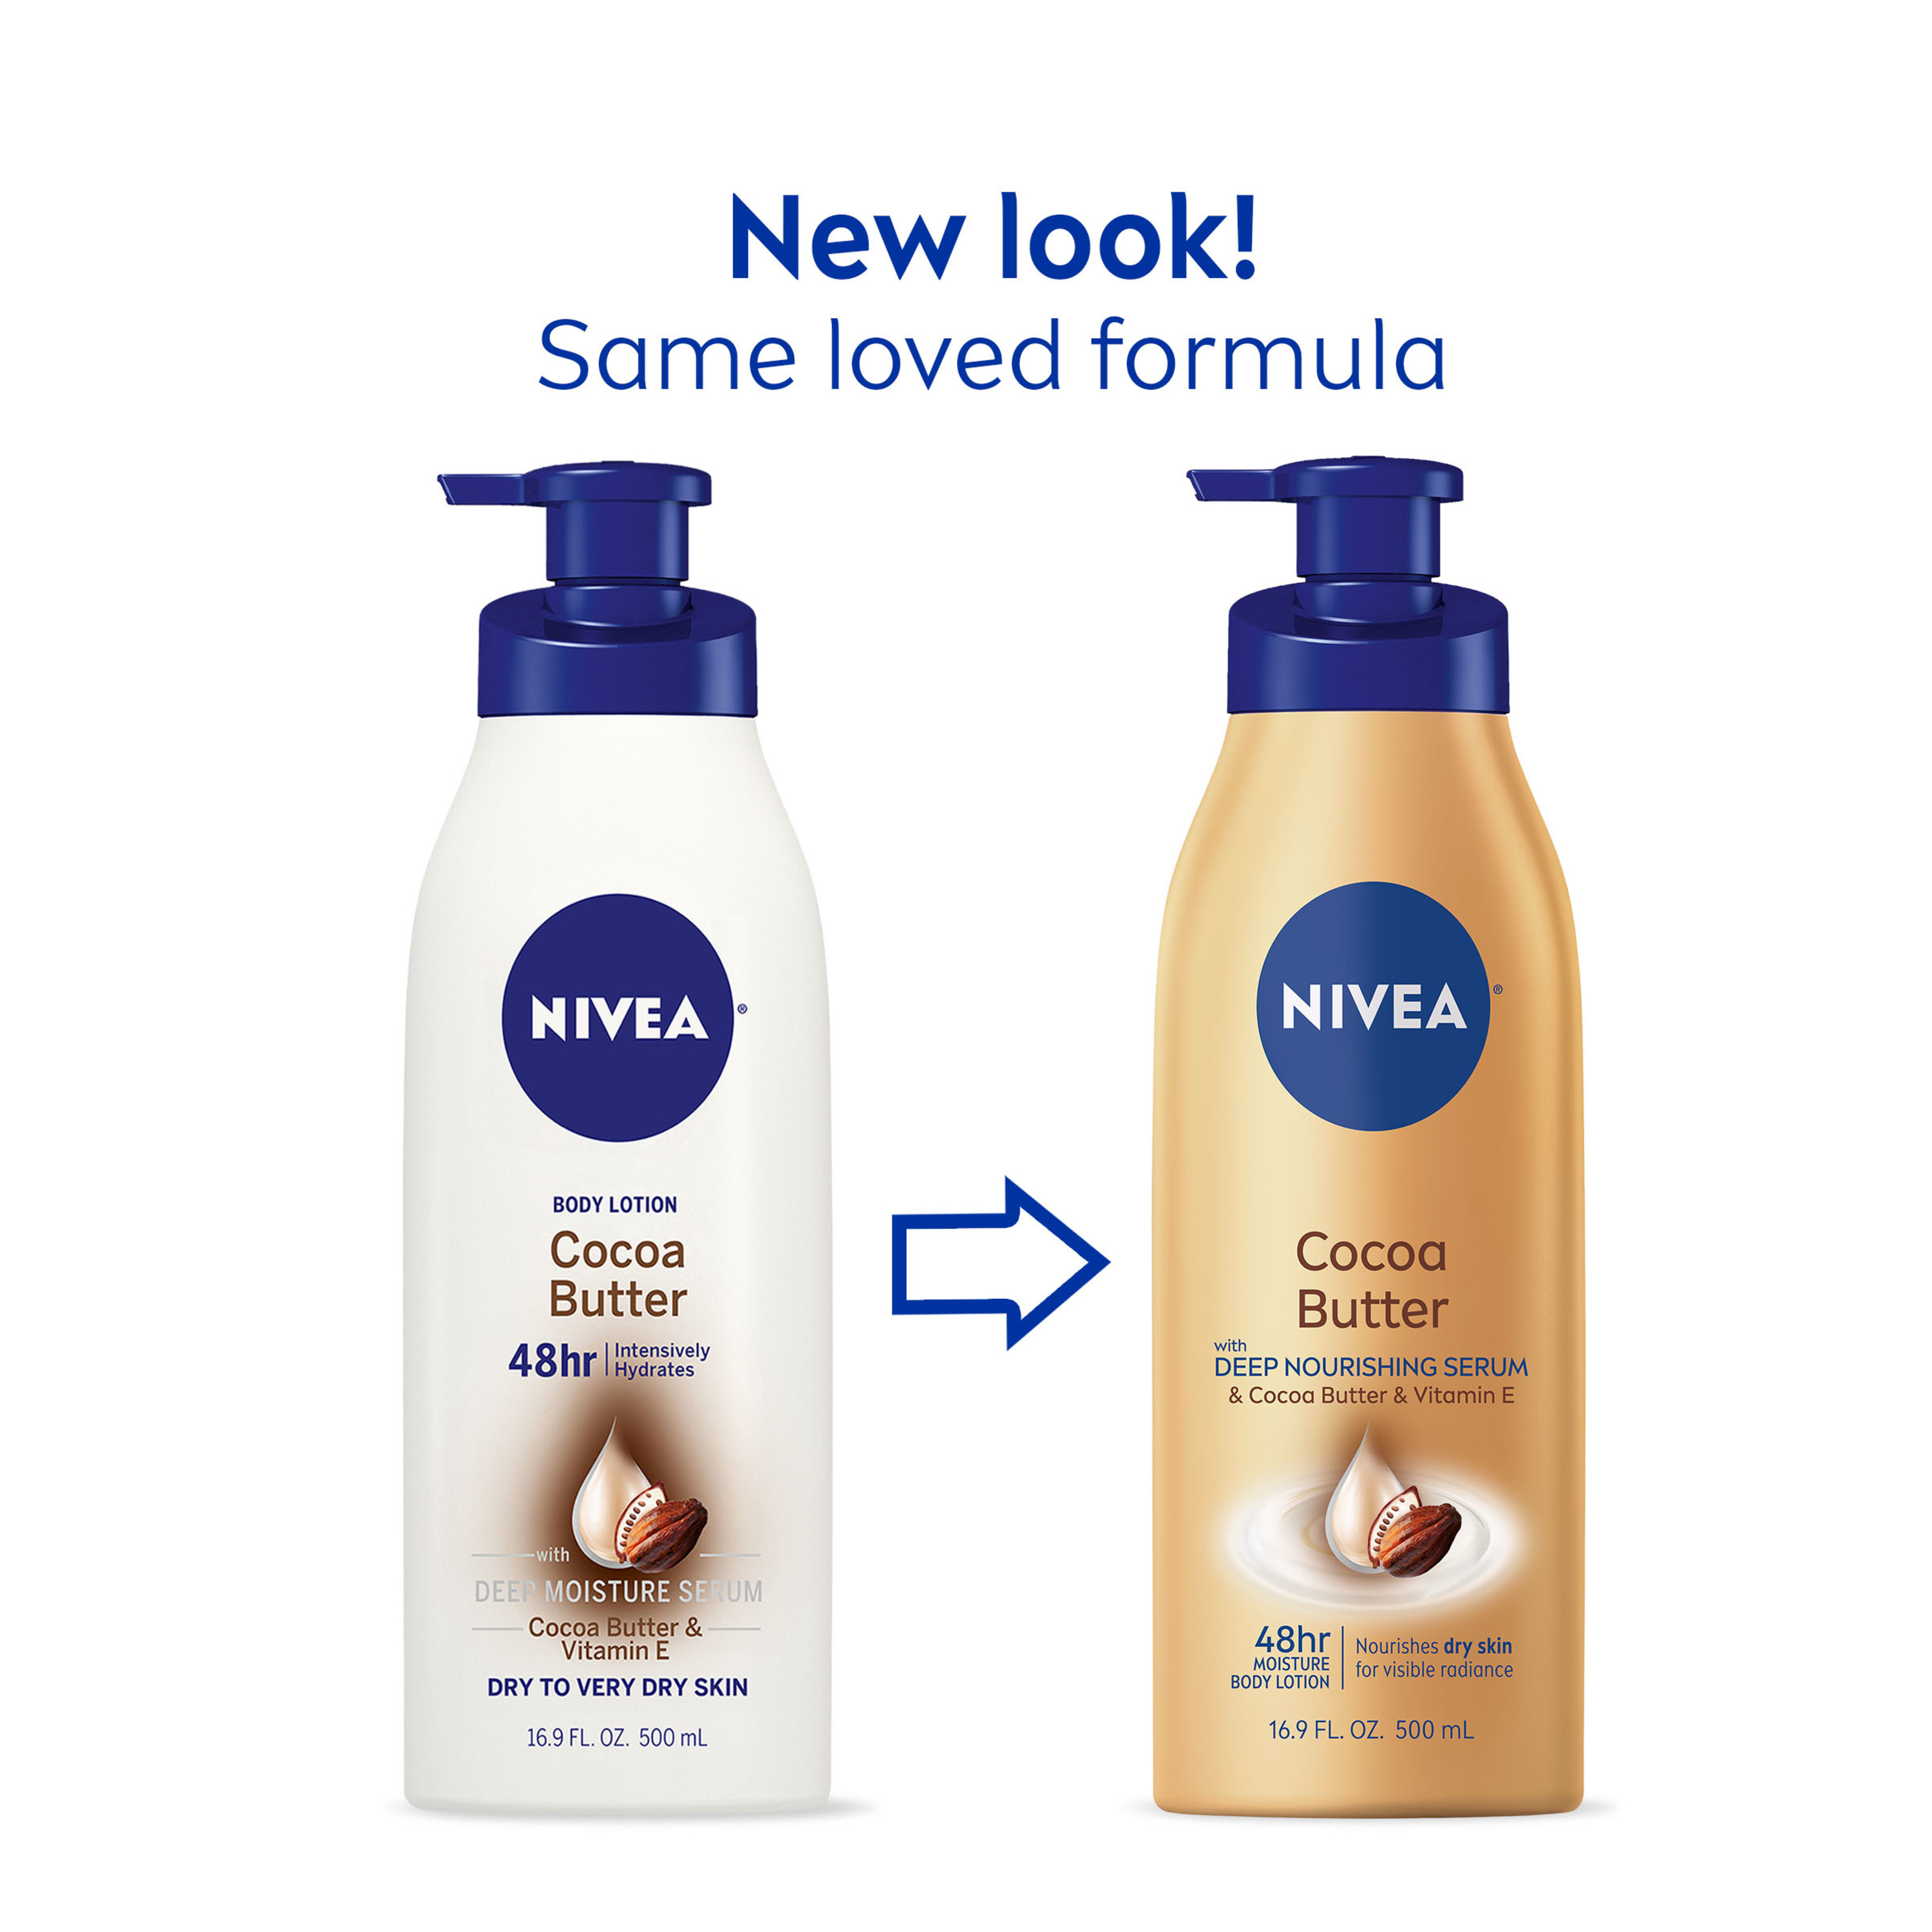 NIVEA Cocoa Butter Body Lotion with Deep Nourishing Serum, 16.9 Fl Oz - image 2 of 10